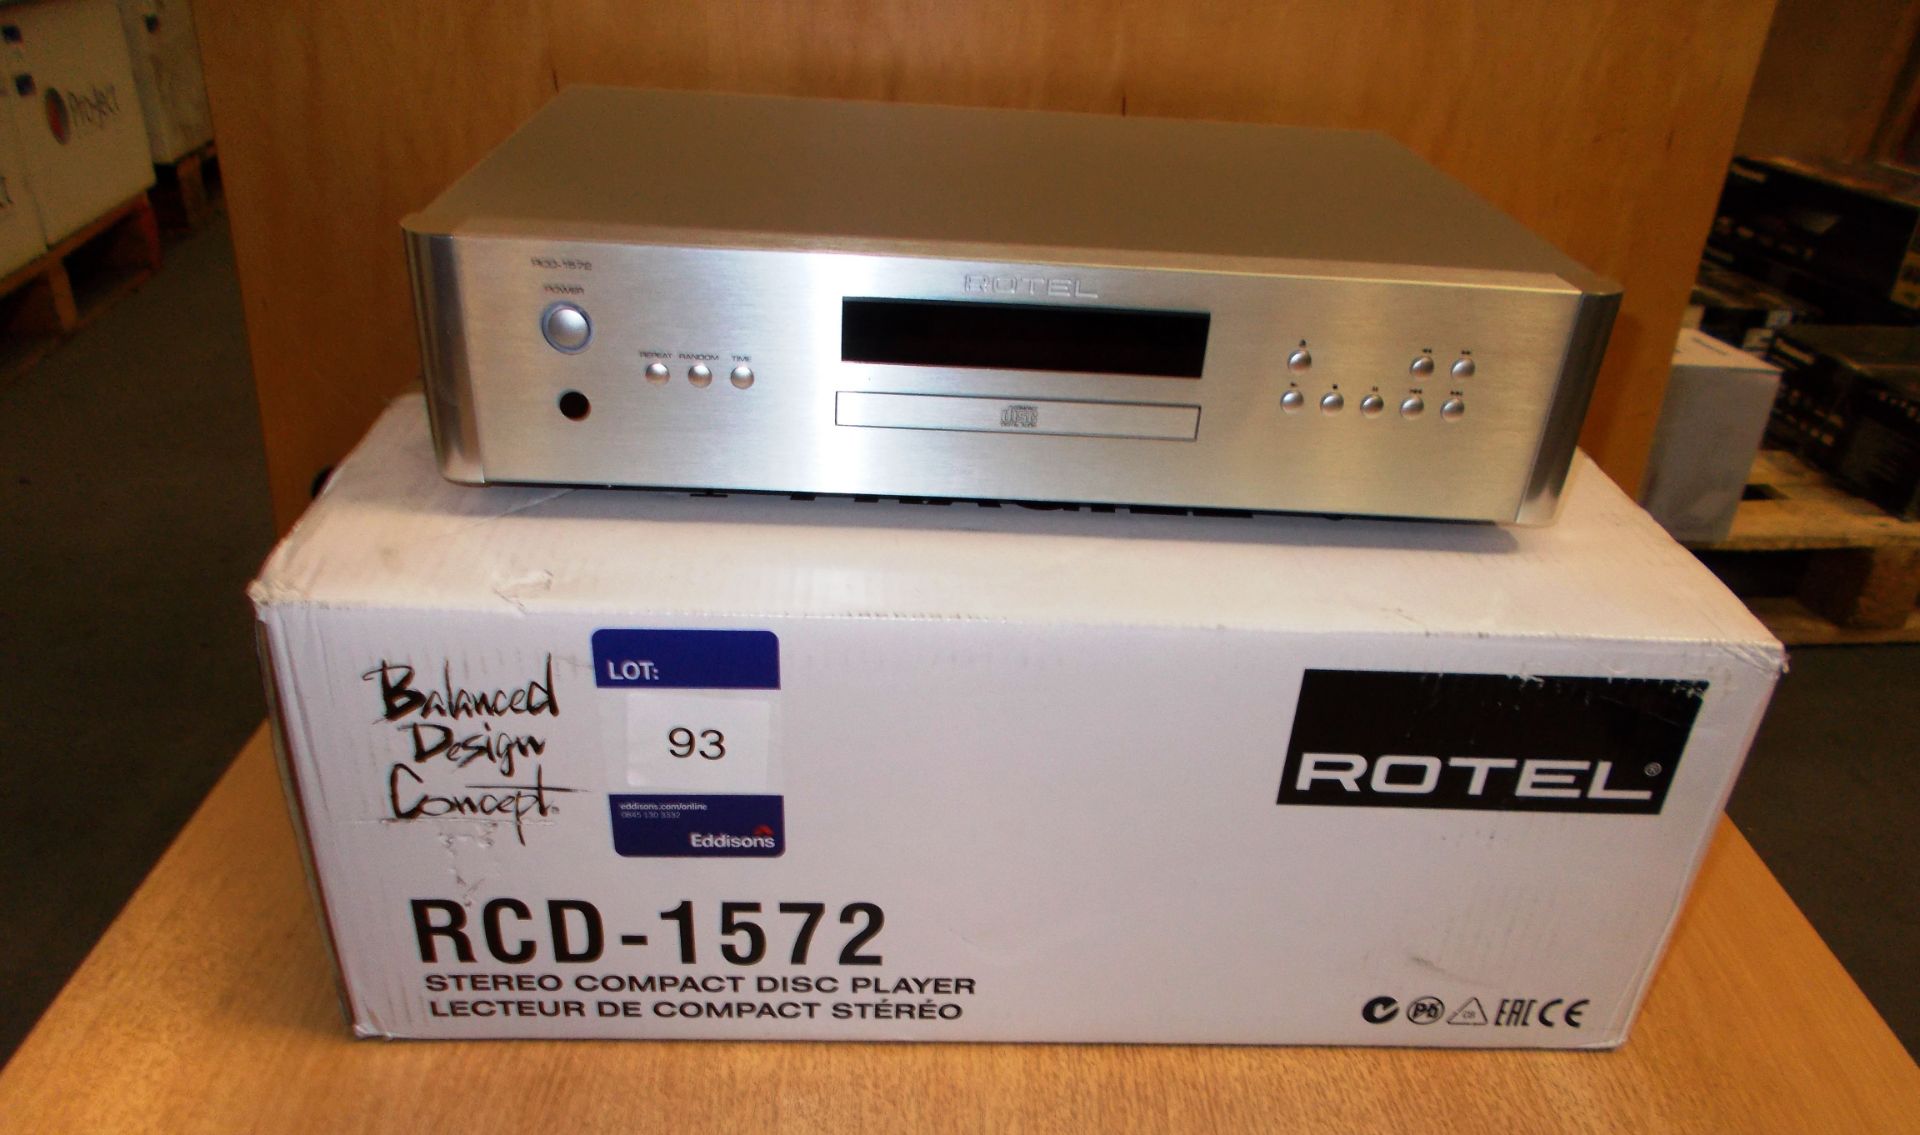 Rotel RCD-1572 Stereo Compact Disc Player, silver (on display) - RRP £845 (collection Monday 29